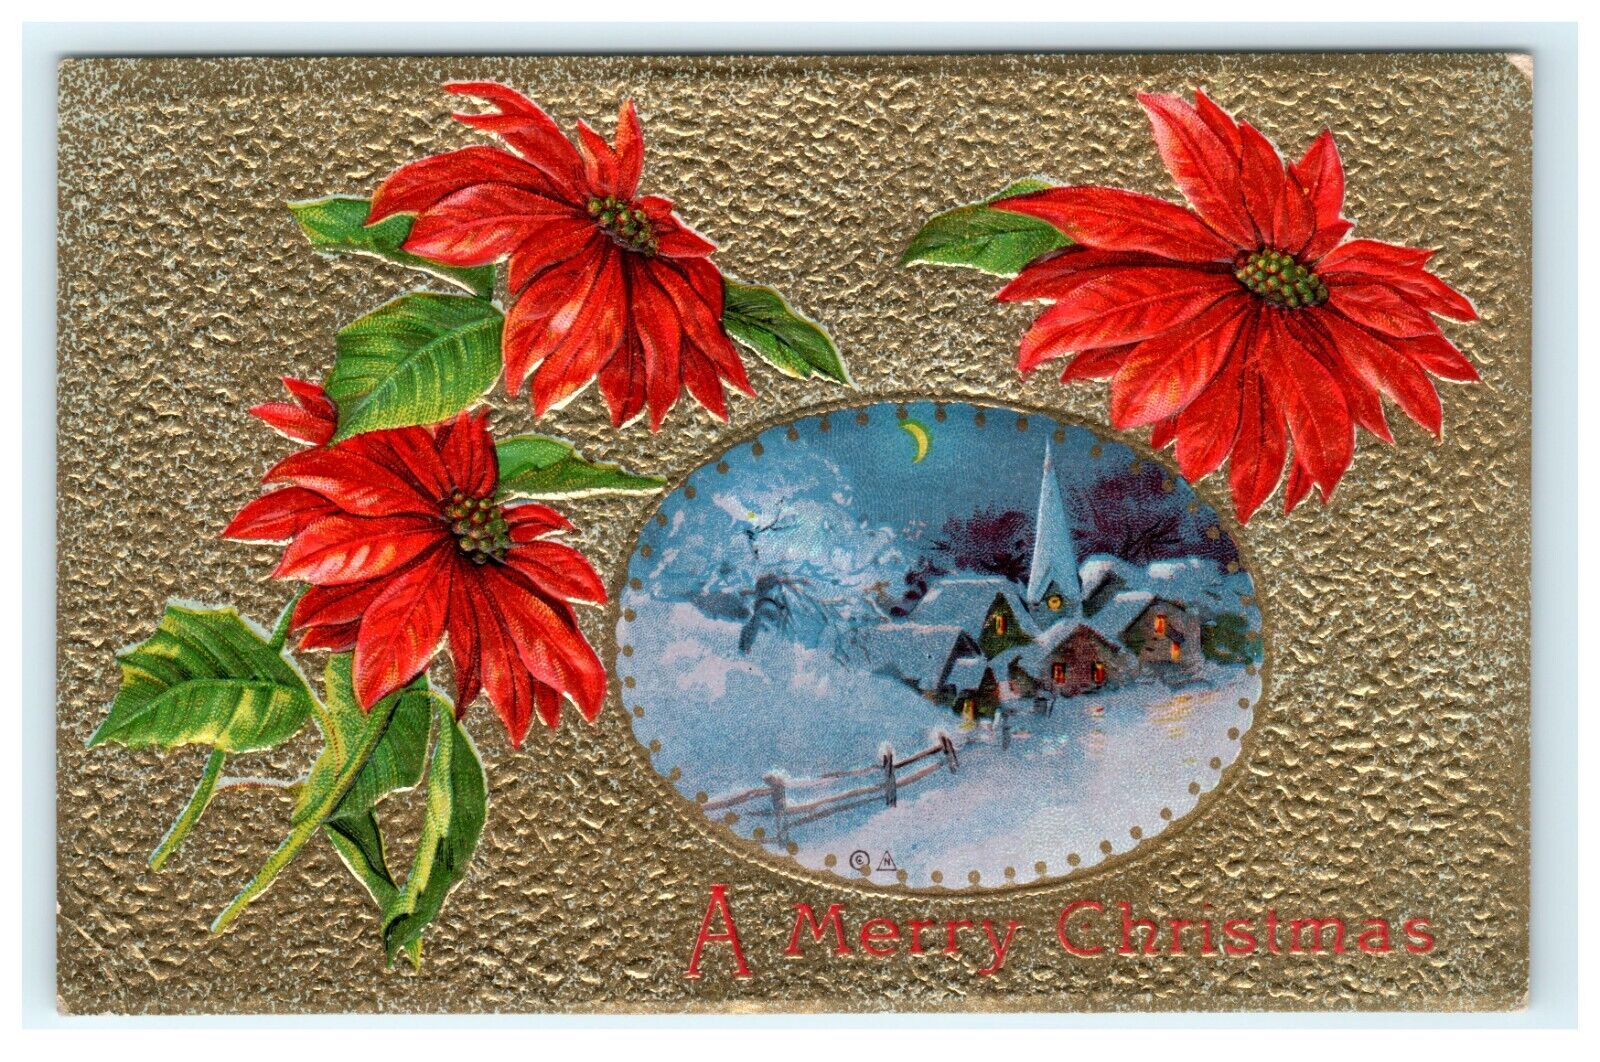 A Merry Christmas Gold Tone Winter Domestic Home Postcard